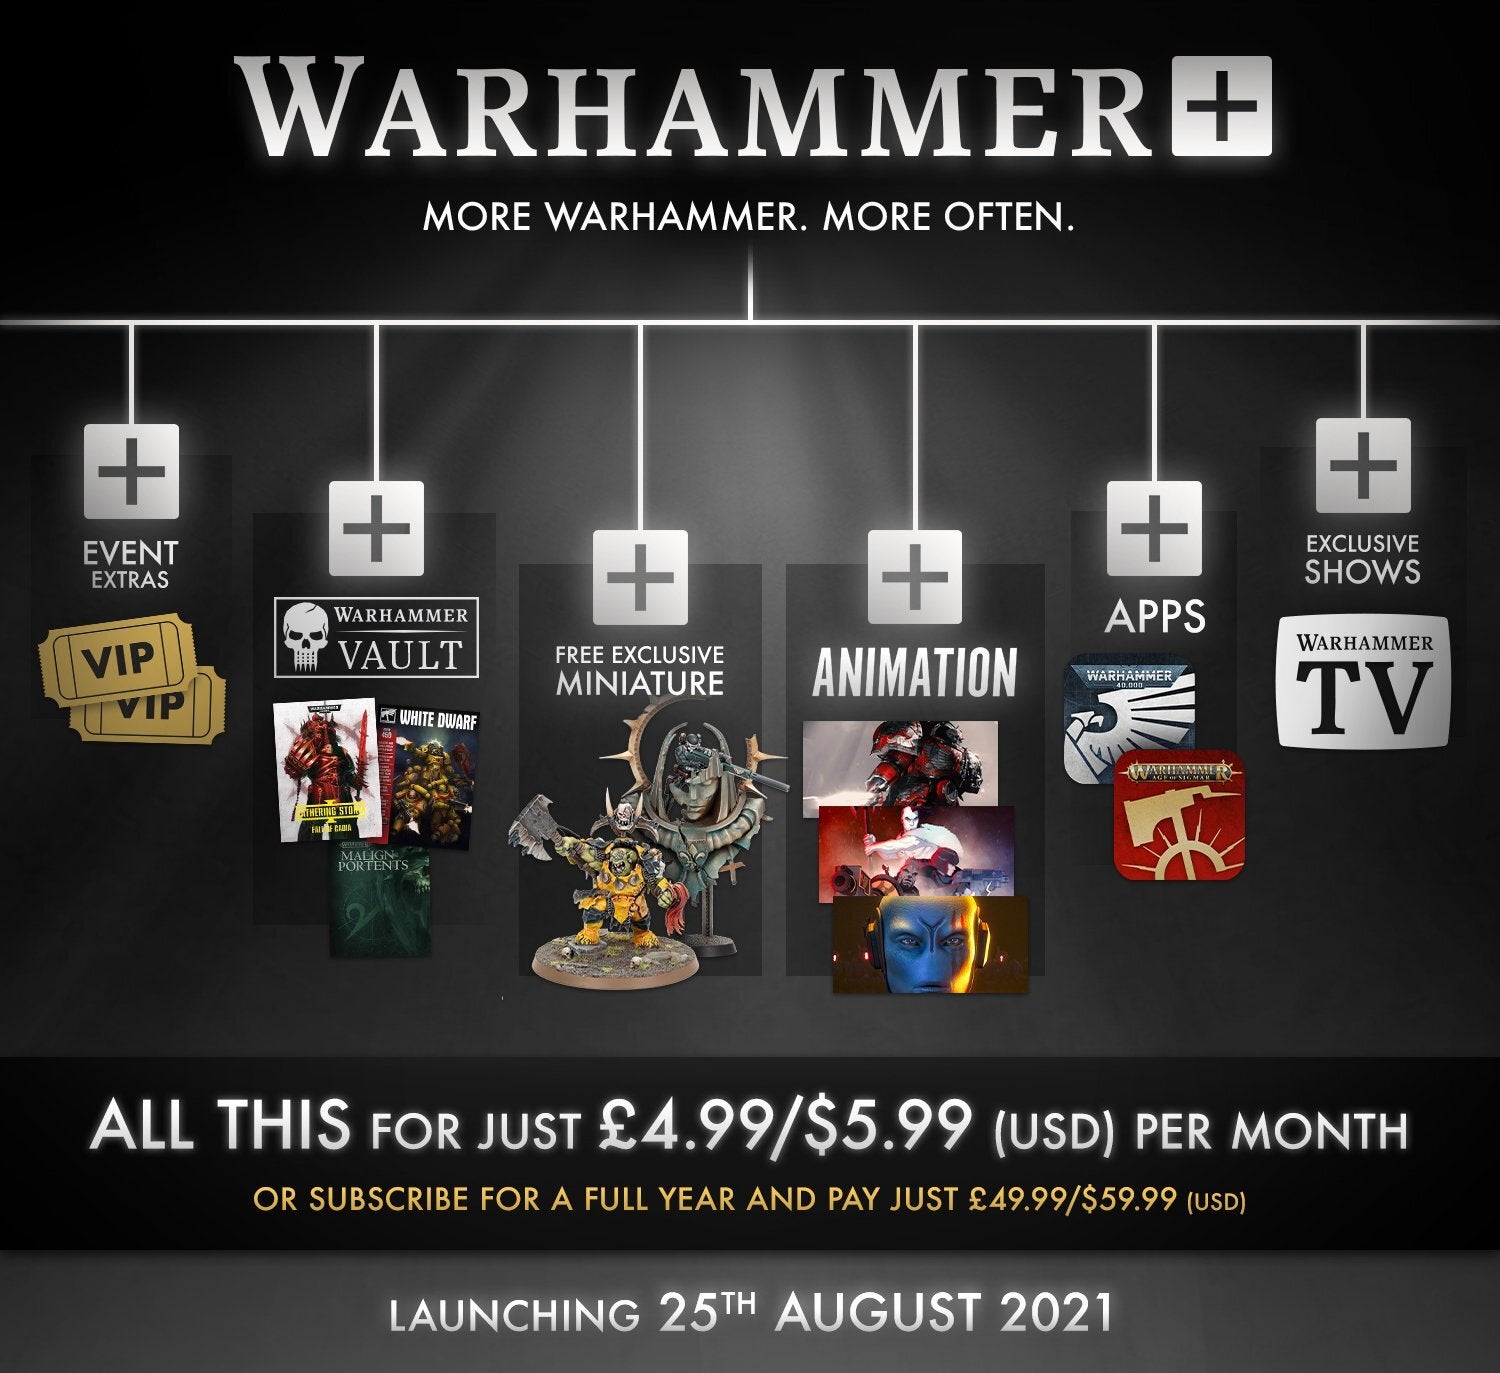 Warhammer subscription streaming service coming to Android and iOS in August